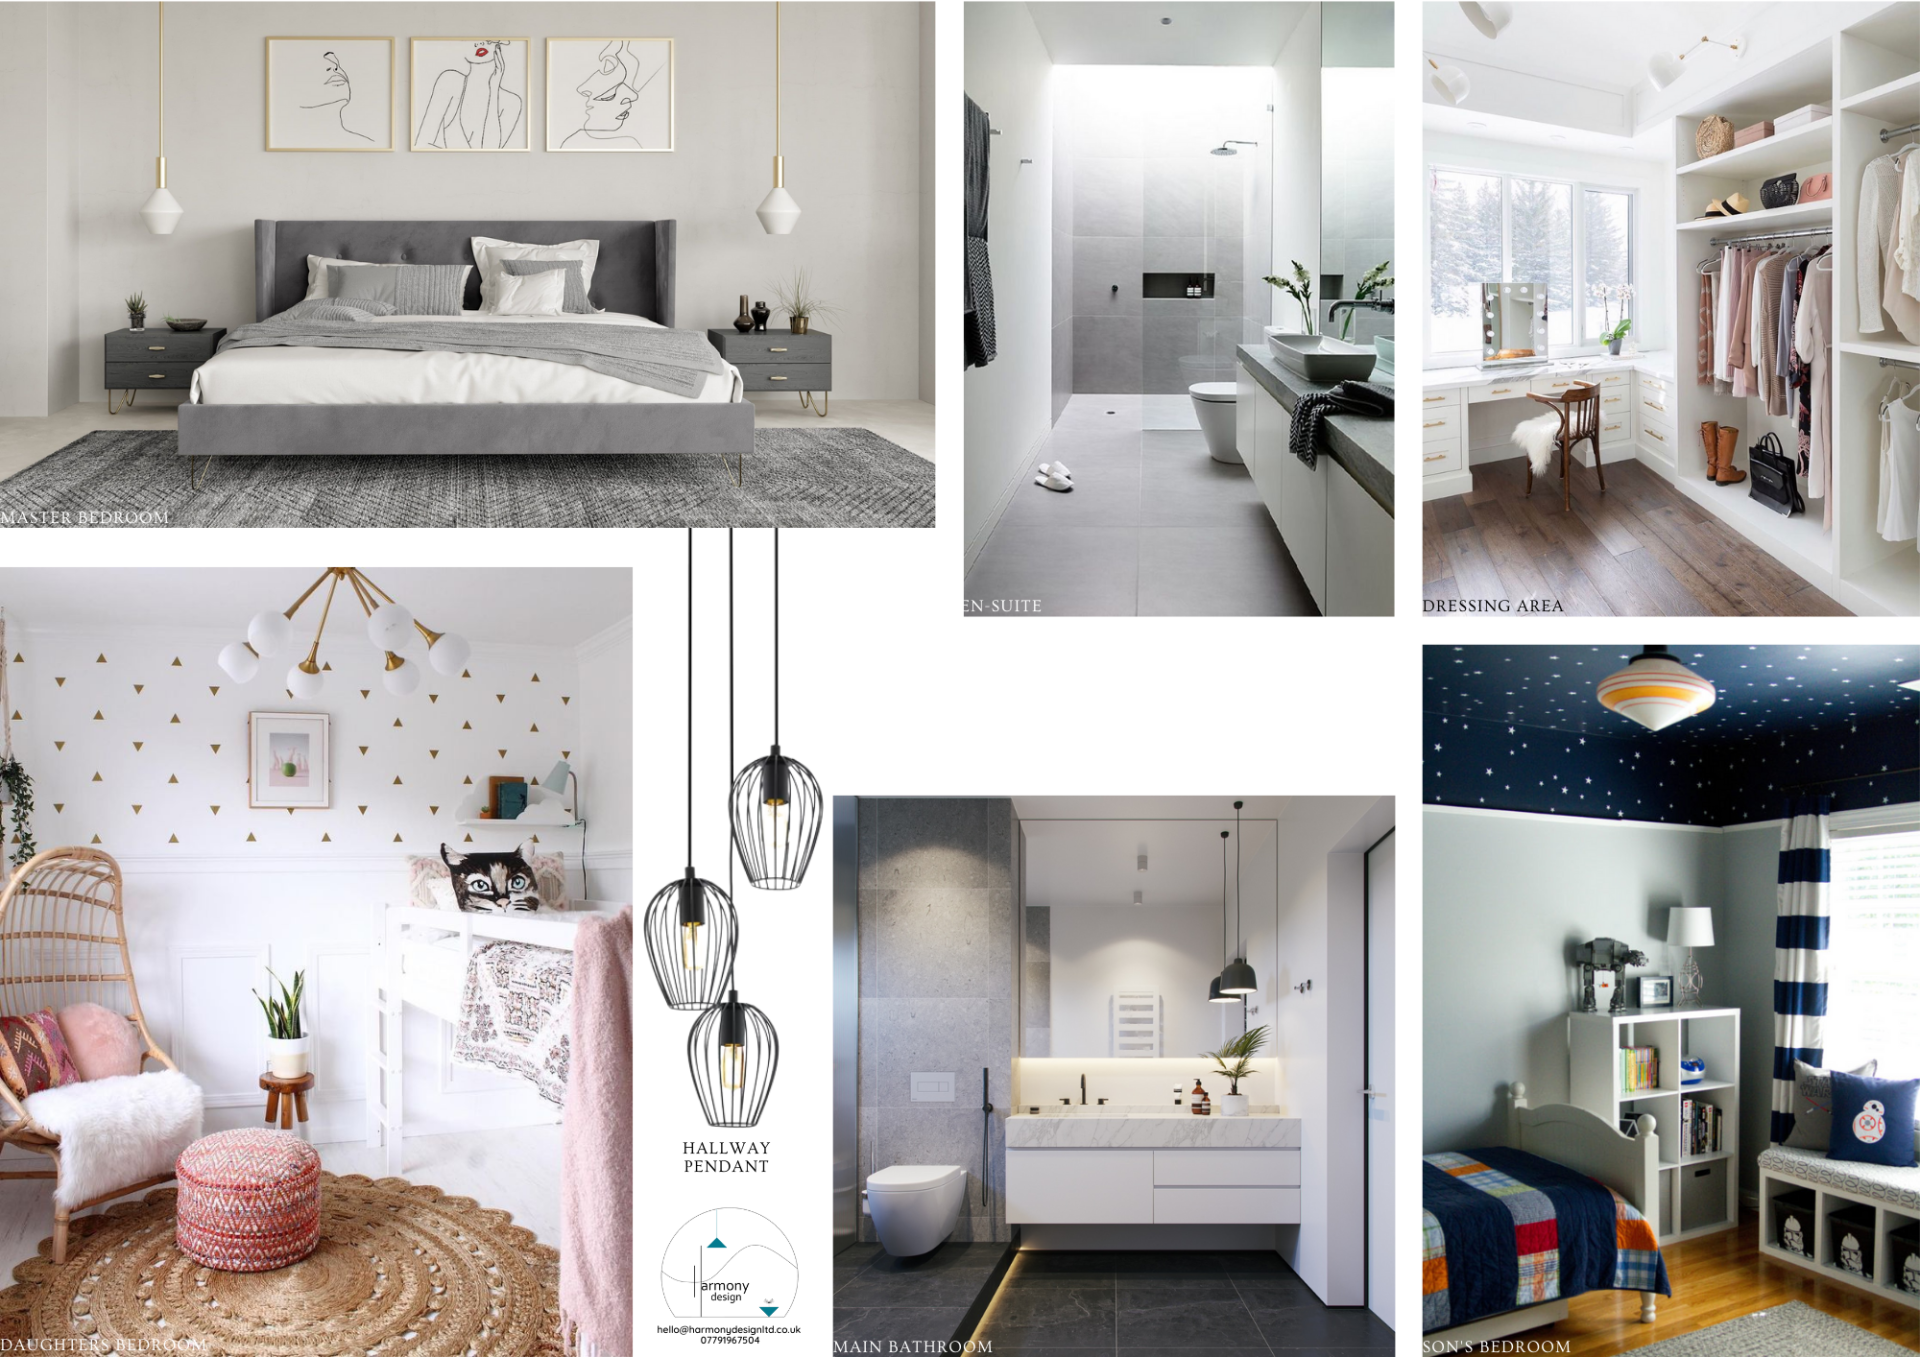 House moodboard, upstais layout change of bedrooms and bathroom.